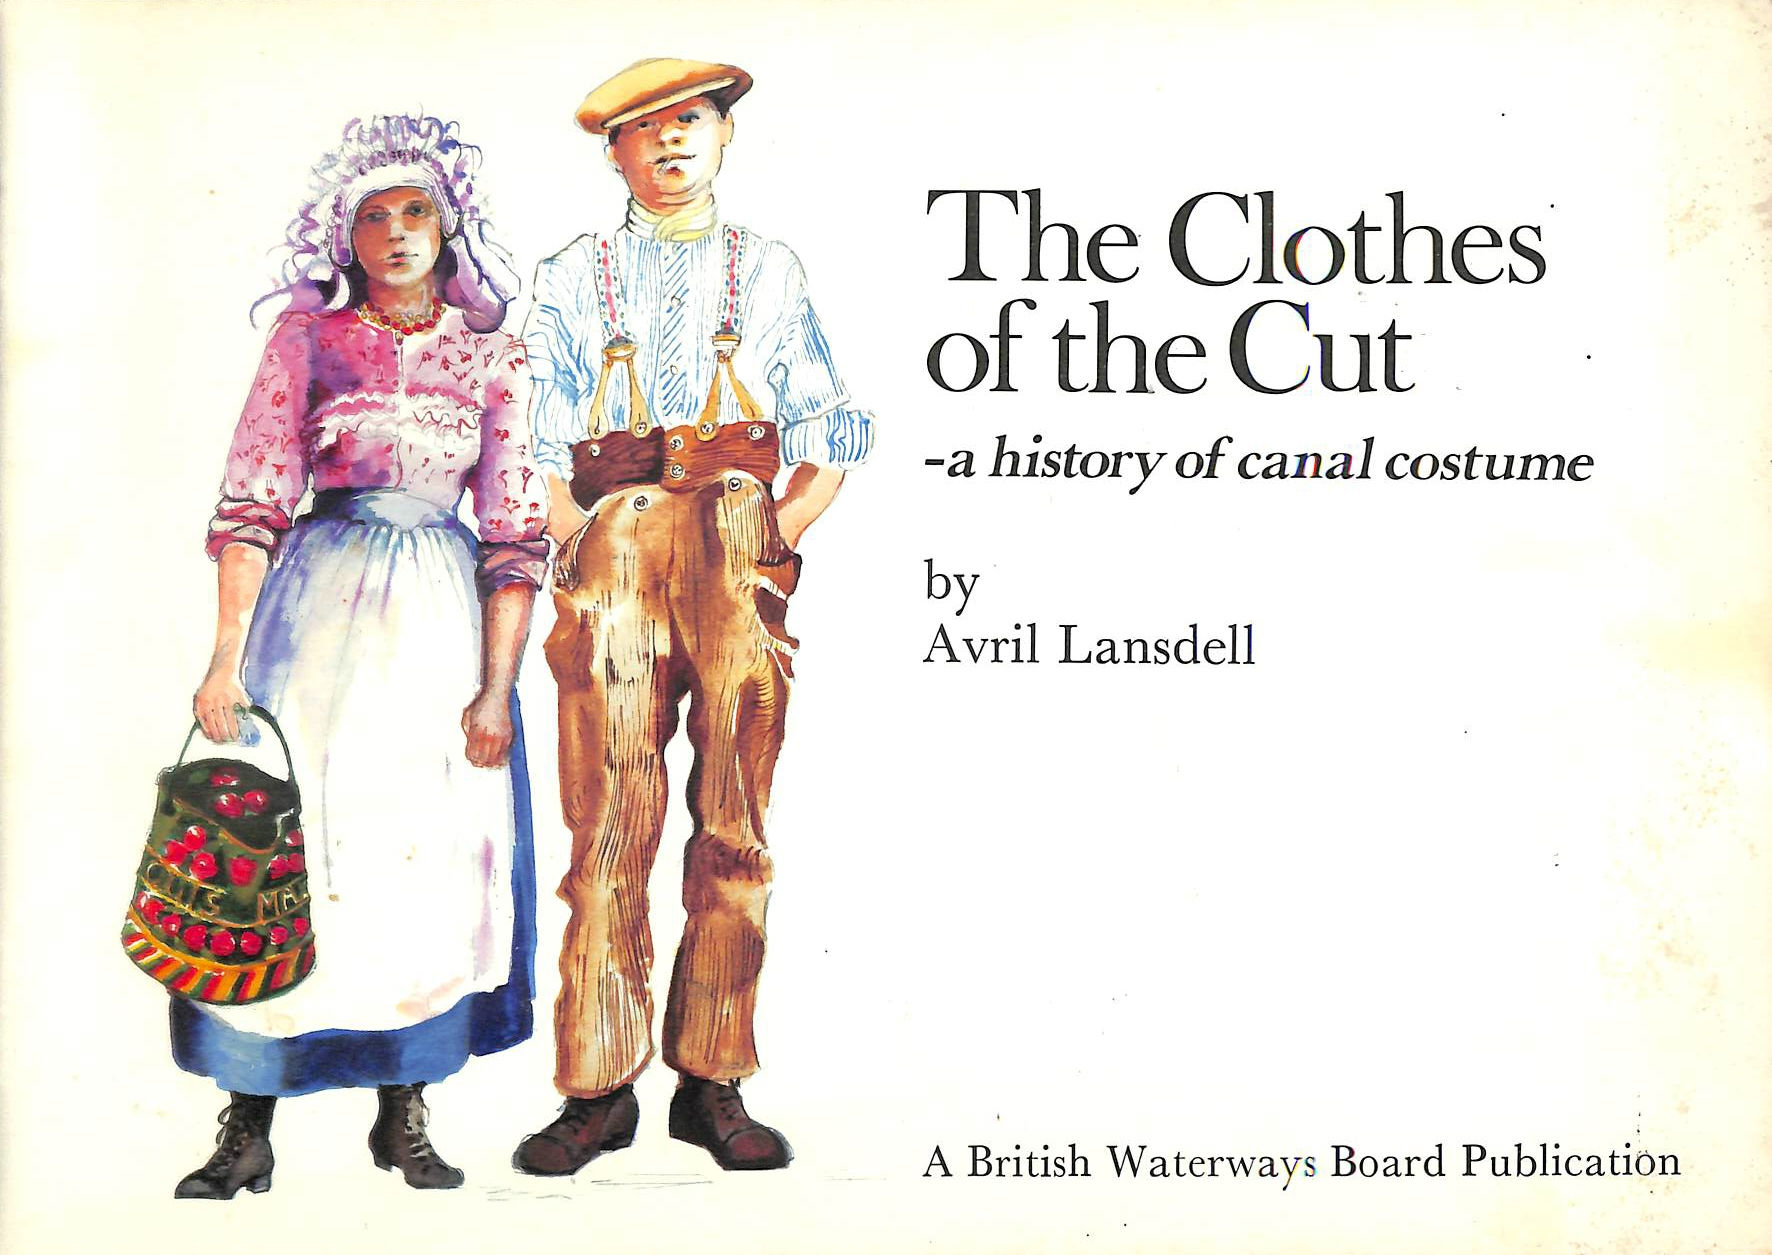 LANSDELL, AVRIL - The Clothes of the Cut: A History of Canal Costume